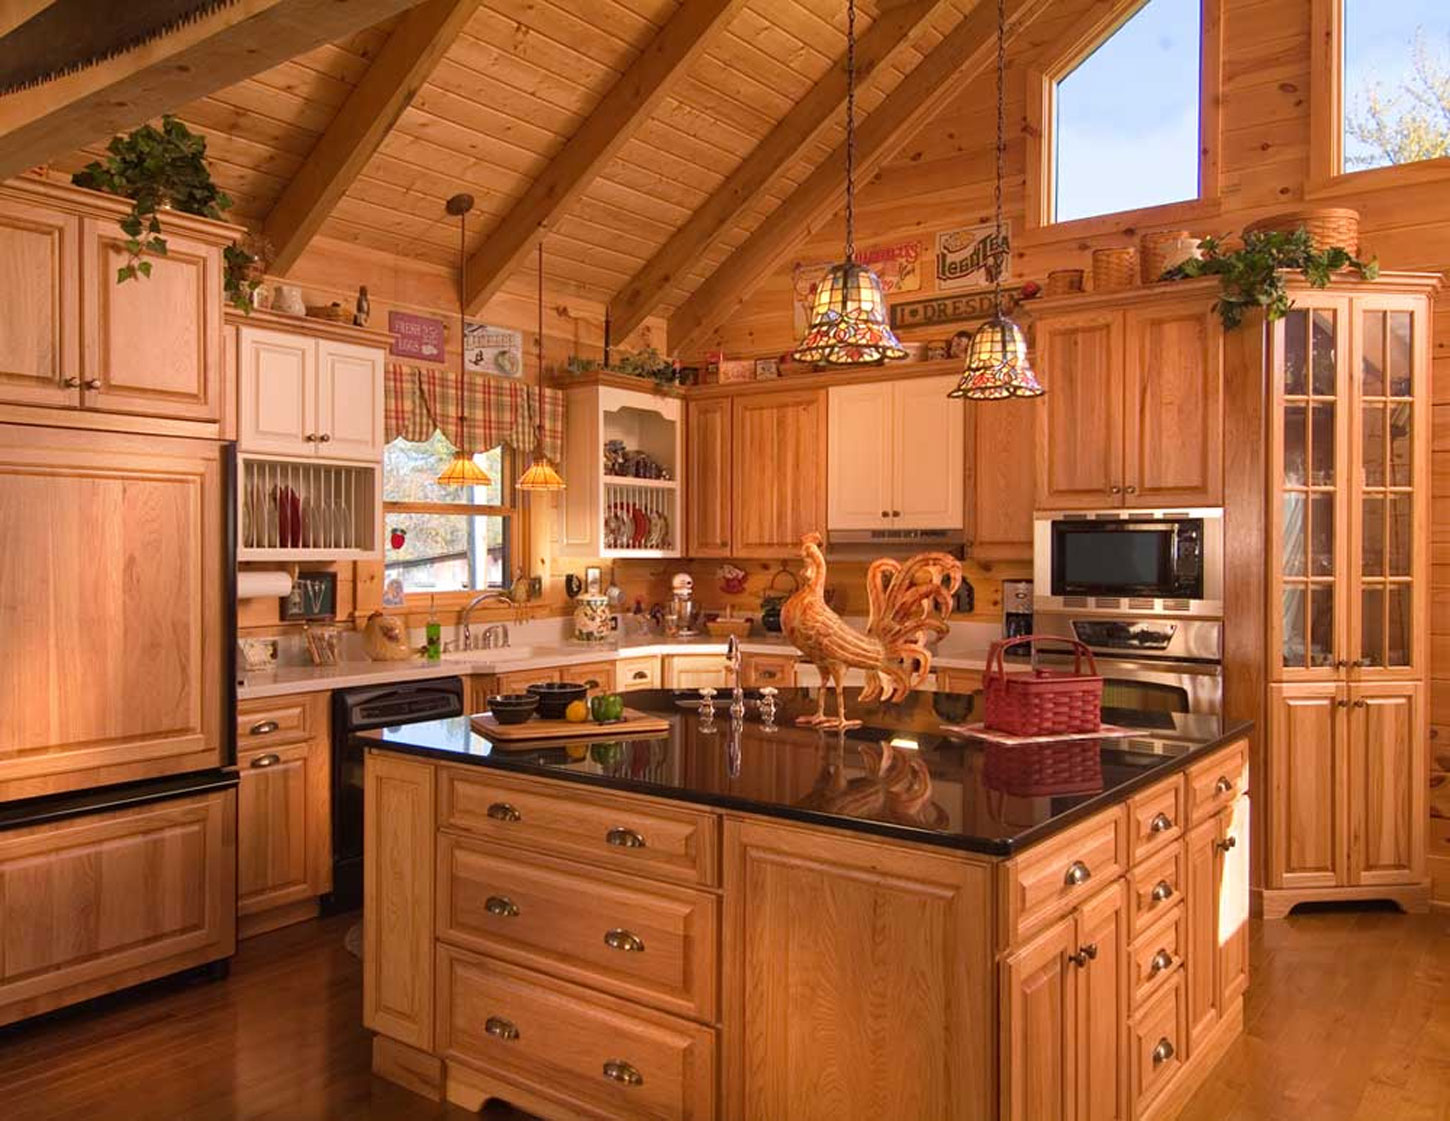 Small Kitchen Cabins Rustic Small Kitchen Design For Cabins With Awesome Light Wood Kitchen Cabinets With Light Wood Floors Design Idea Also Kitchen Island Design Ideas Kitchen The Balance Between The Small Kitchen Design And Decoration